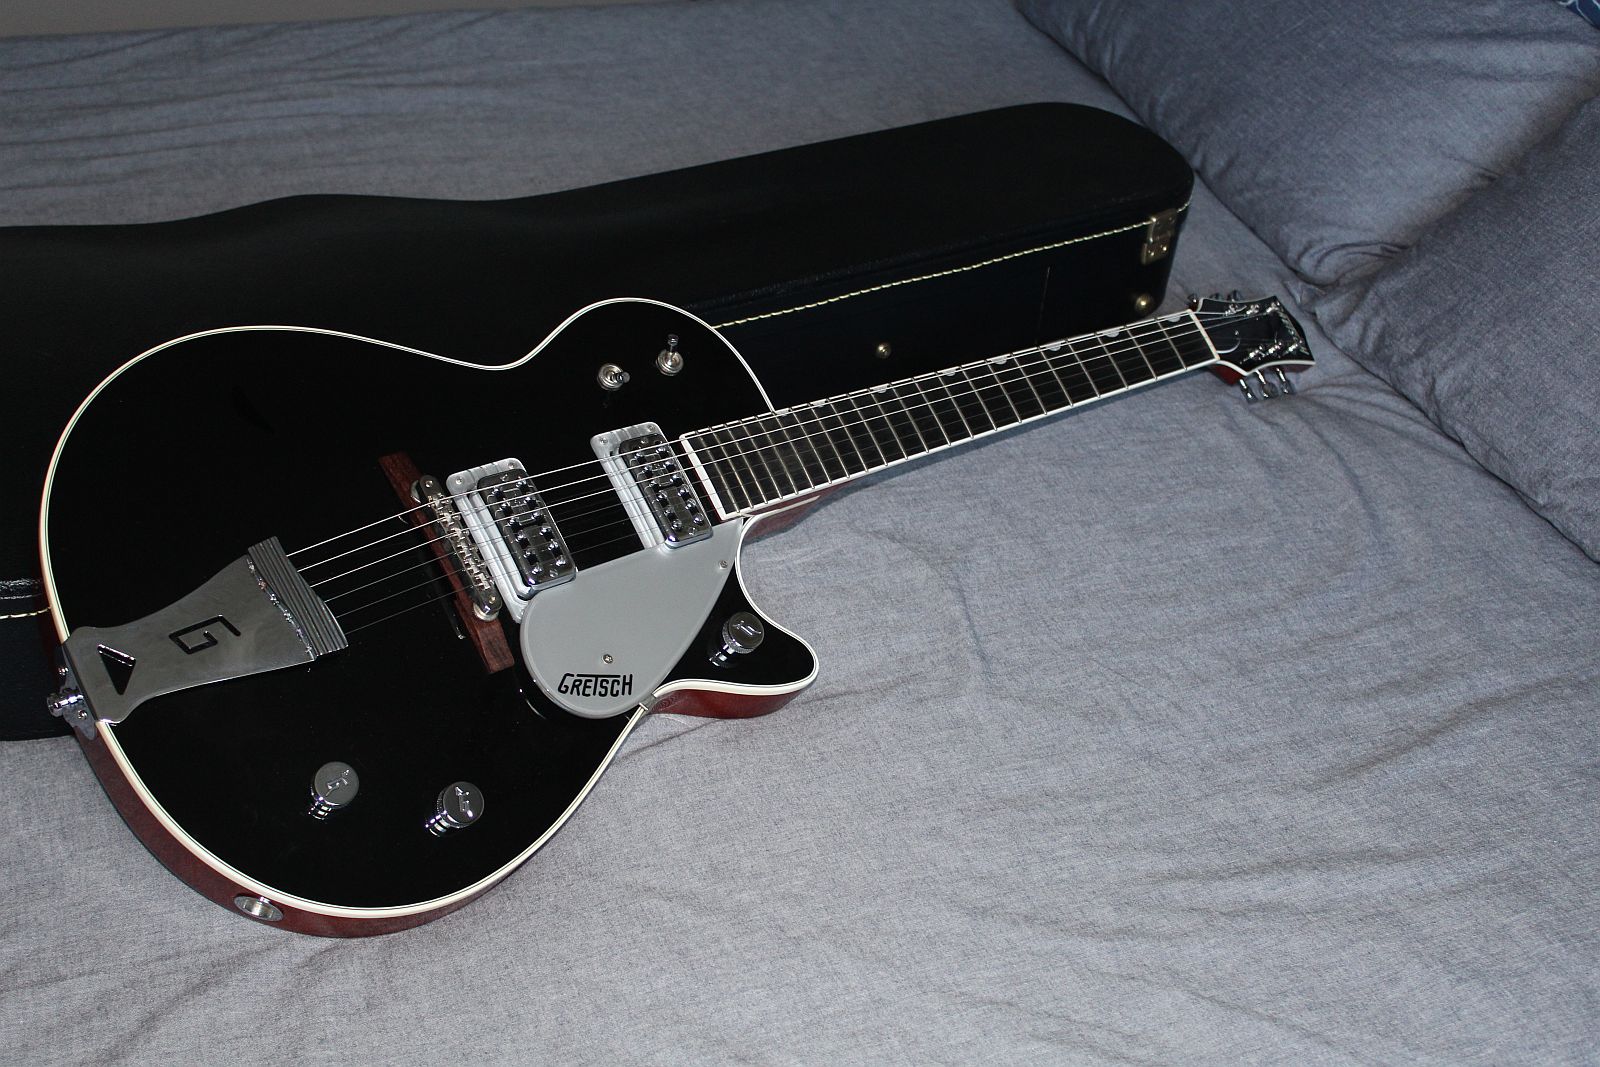 First look, taste and thoughts on the Gretsch Power Jet-gretsh6128fulllength-jpg